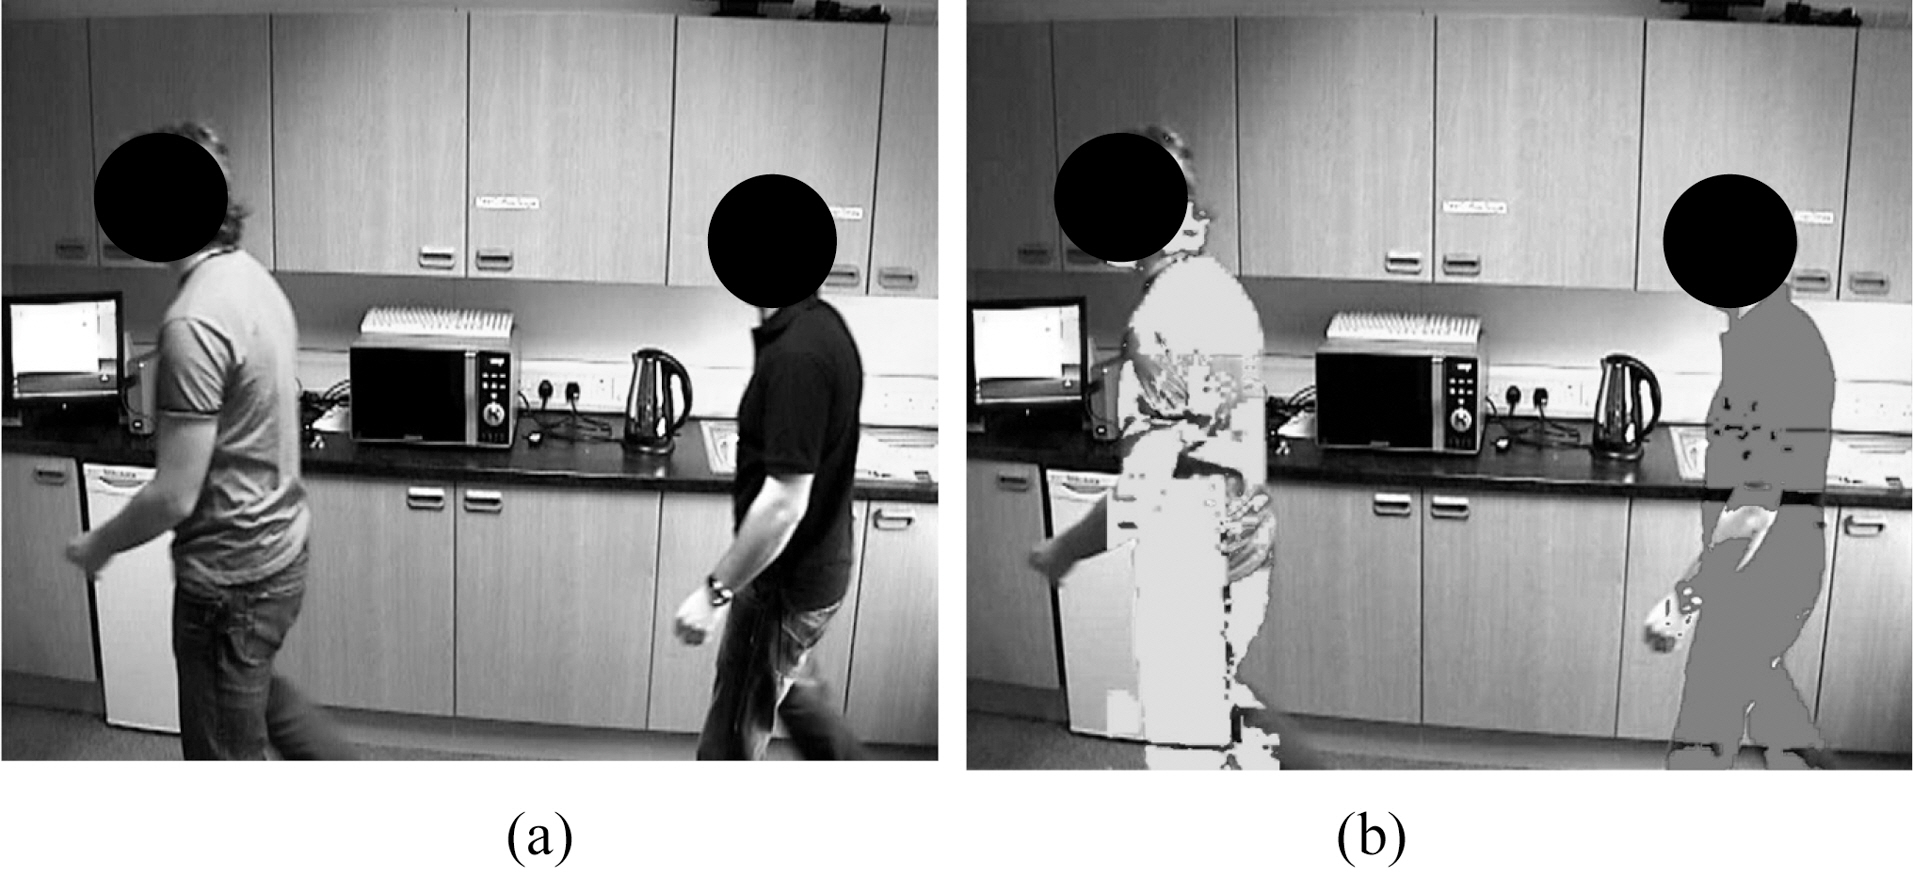 Video processing will be capable of taking the original videosequence as shown in (a) and computing areas of motion representativeof humans as shown in (b).